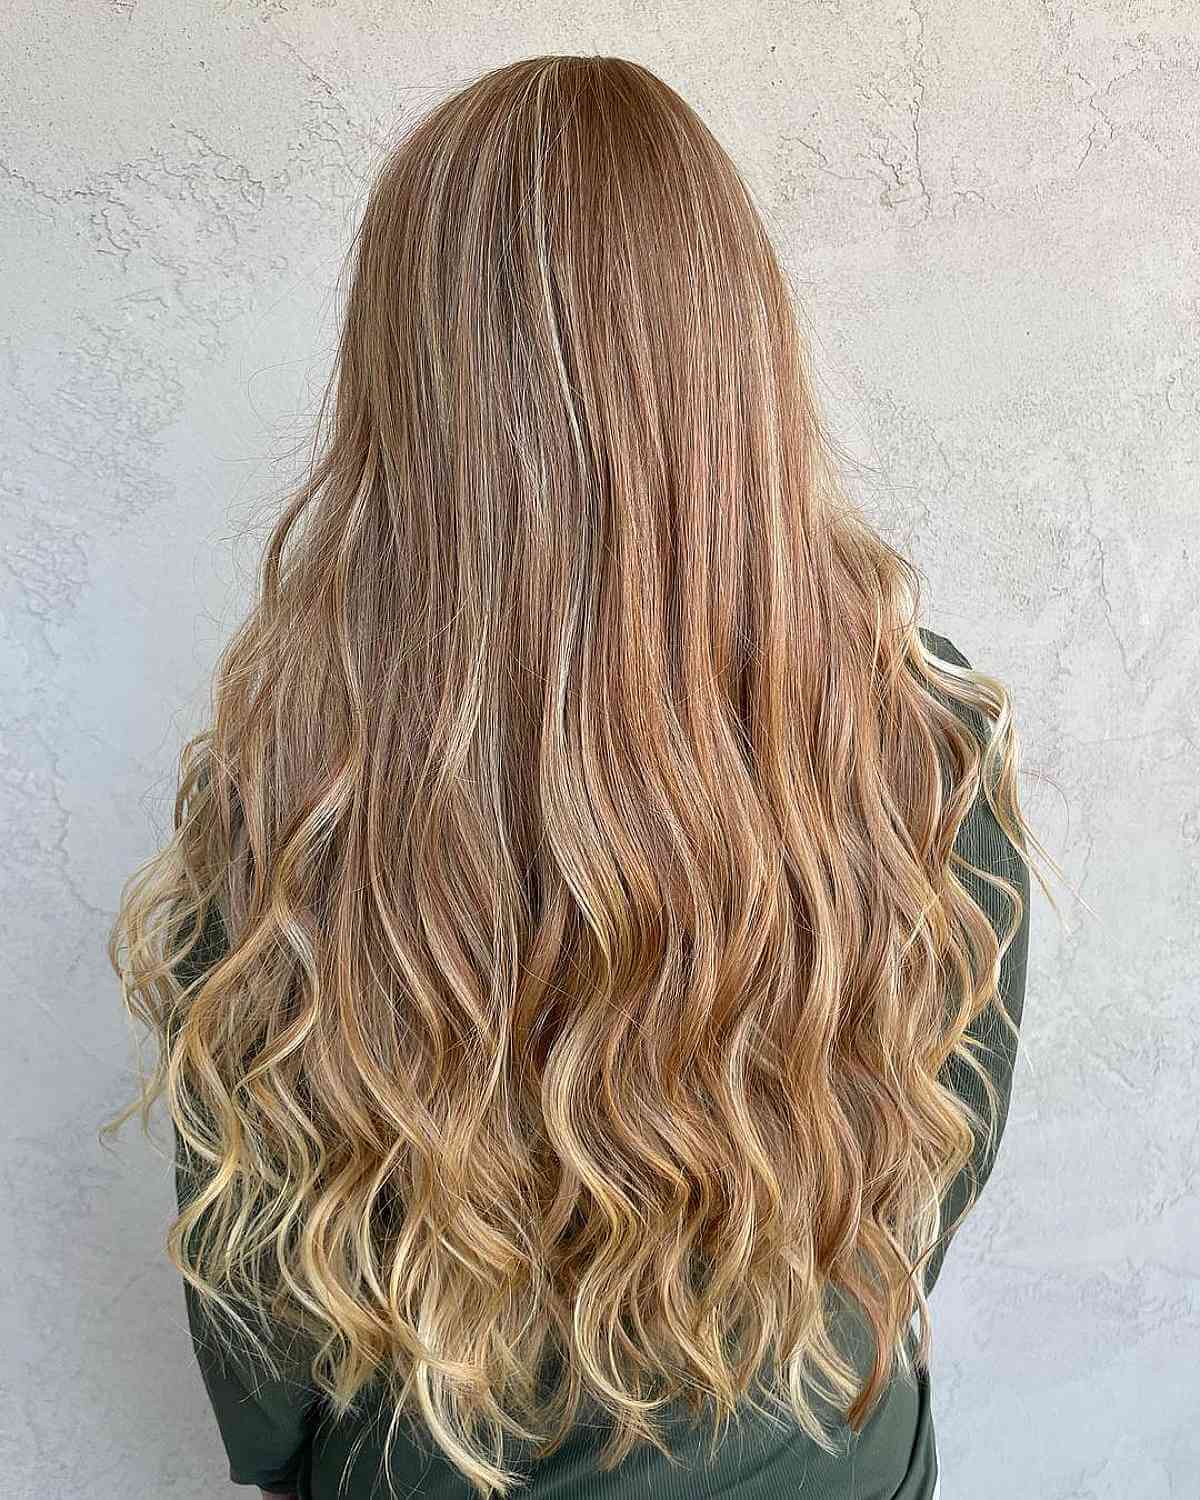 Natural Strawberry Blonde with Sun-Kissed Highlights